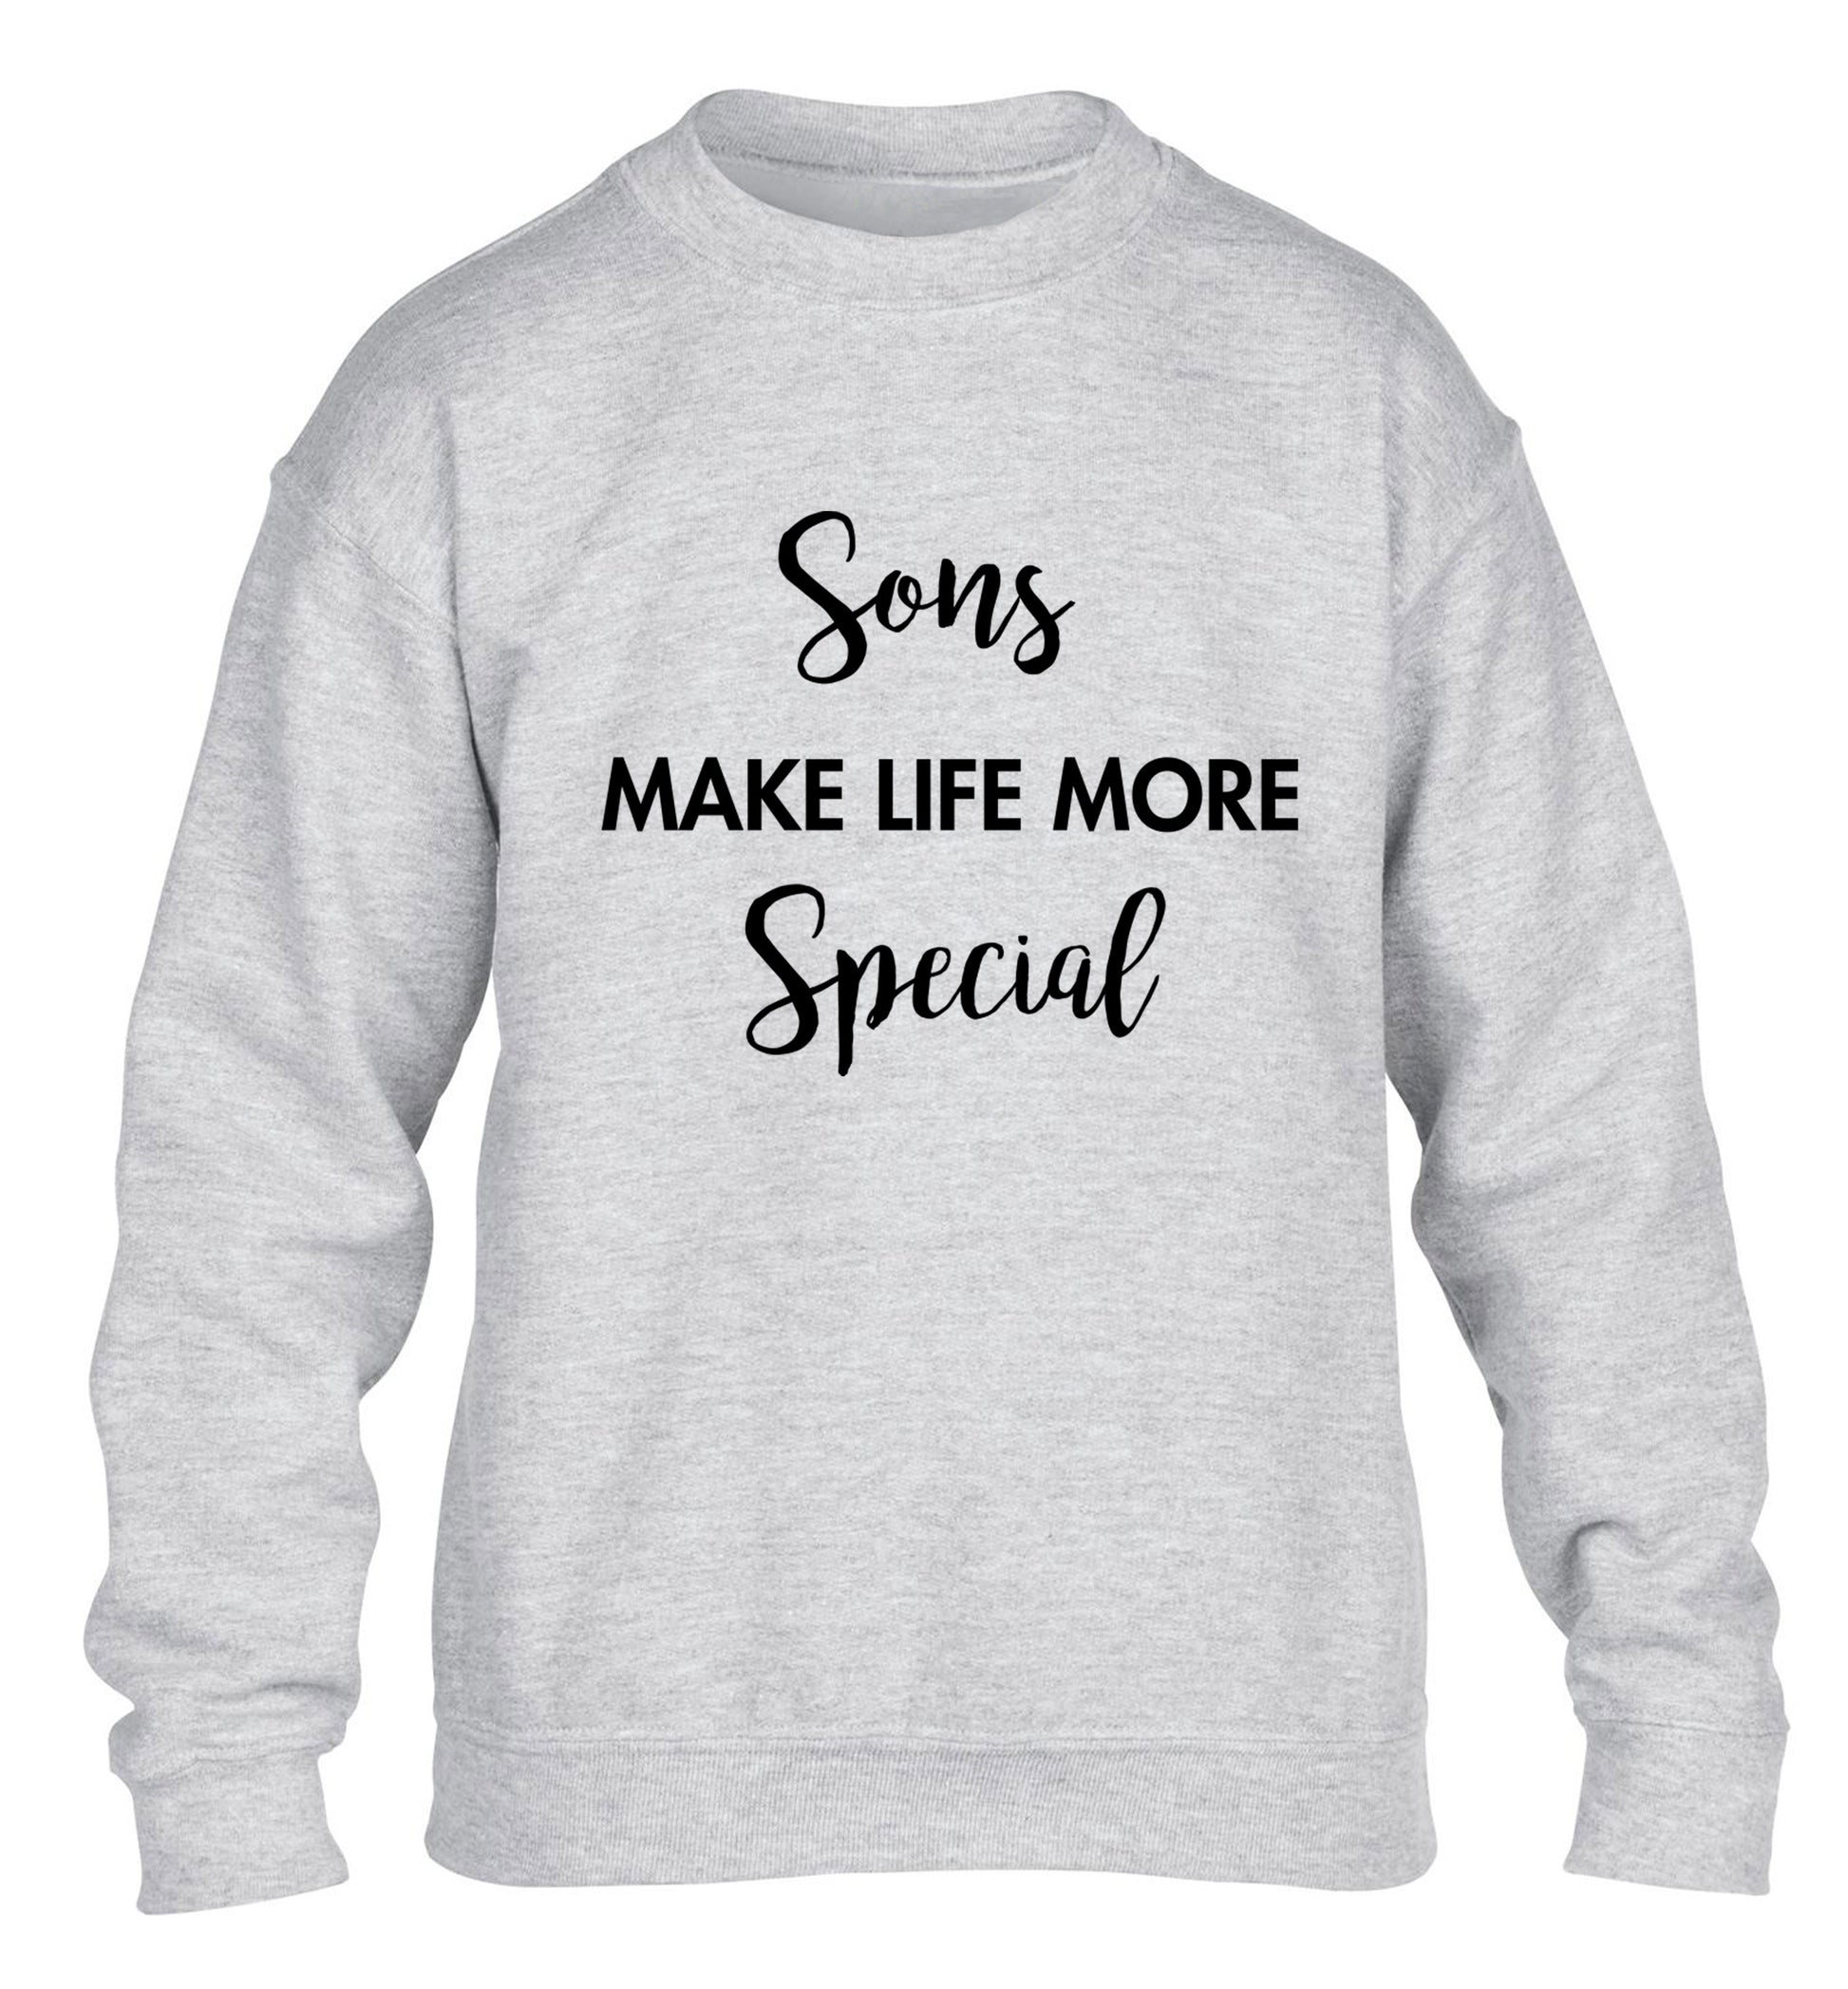 Sons make life more special children's grey sweater 12-14 Years